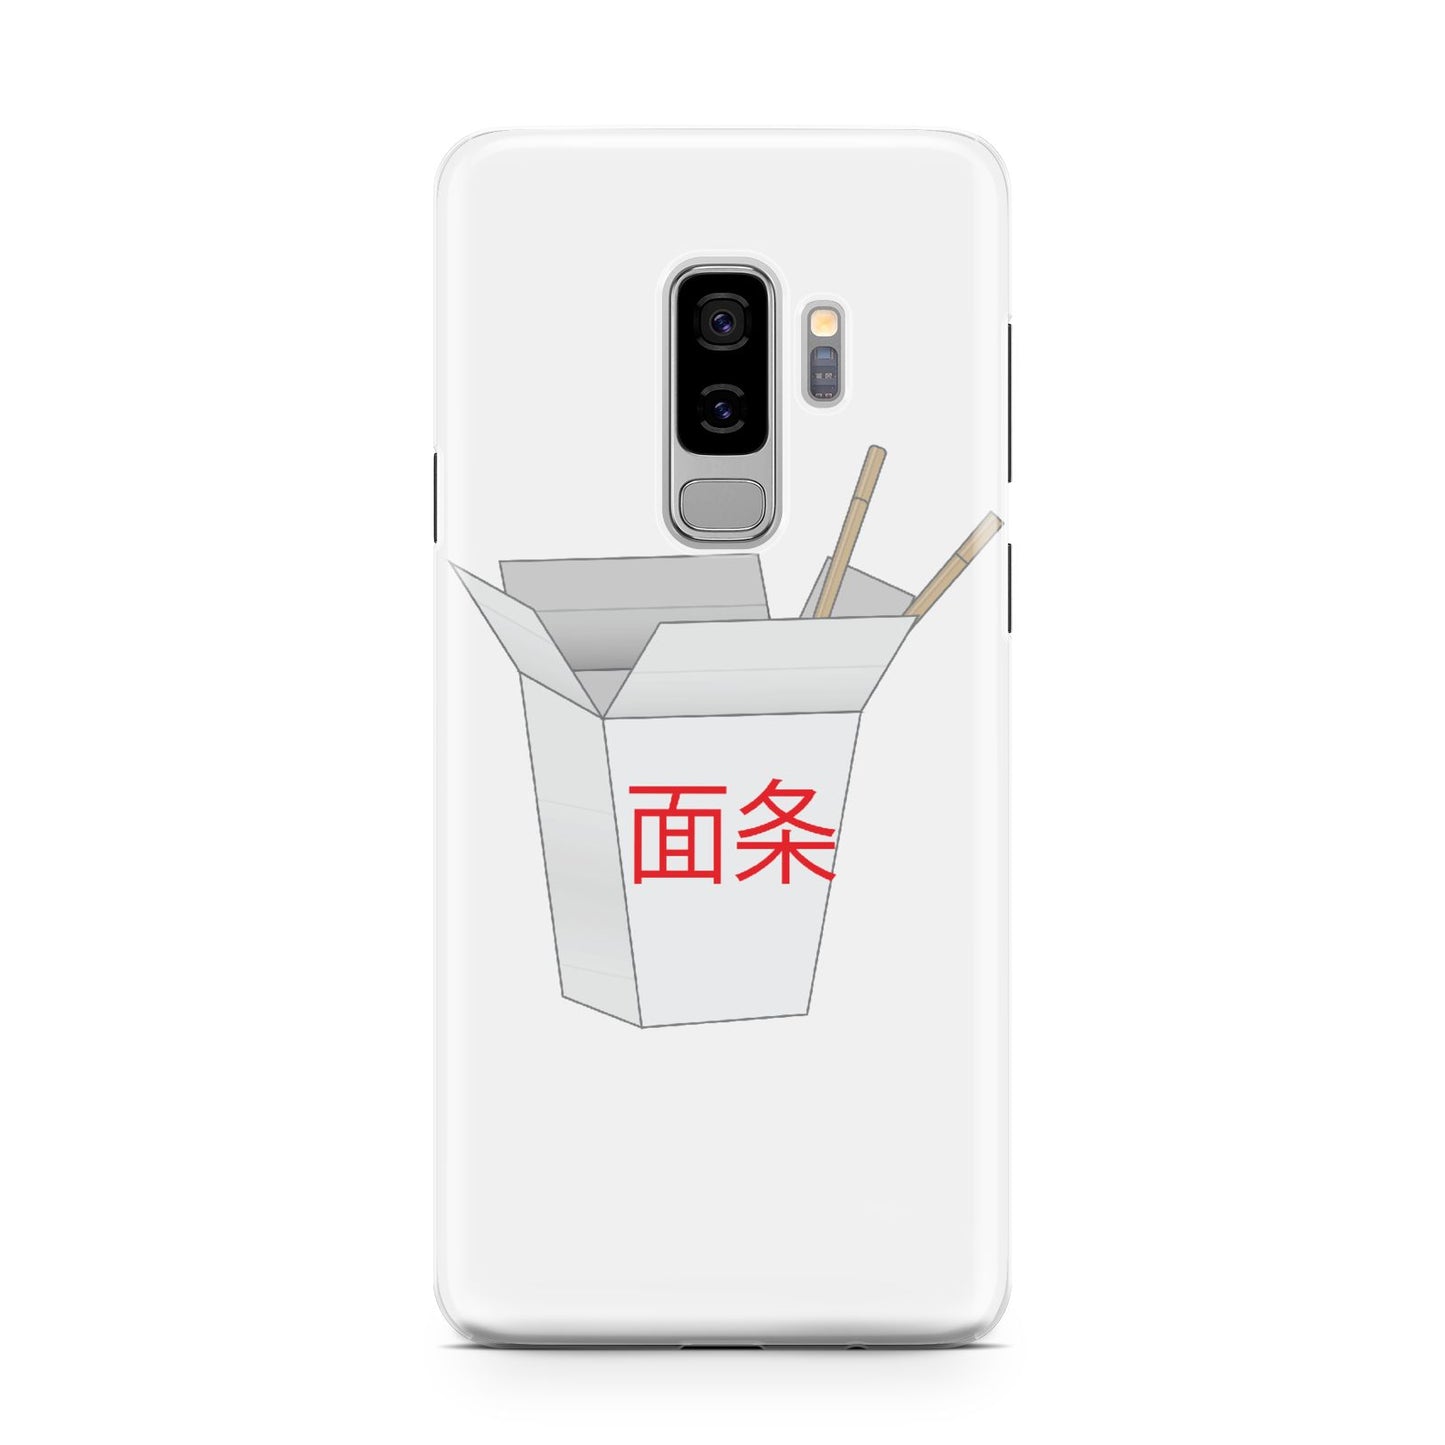 Chinese Takeaway Box Samsung Galaxy S9 Plus Case on Silver phone